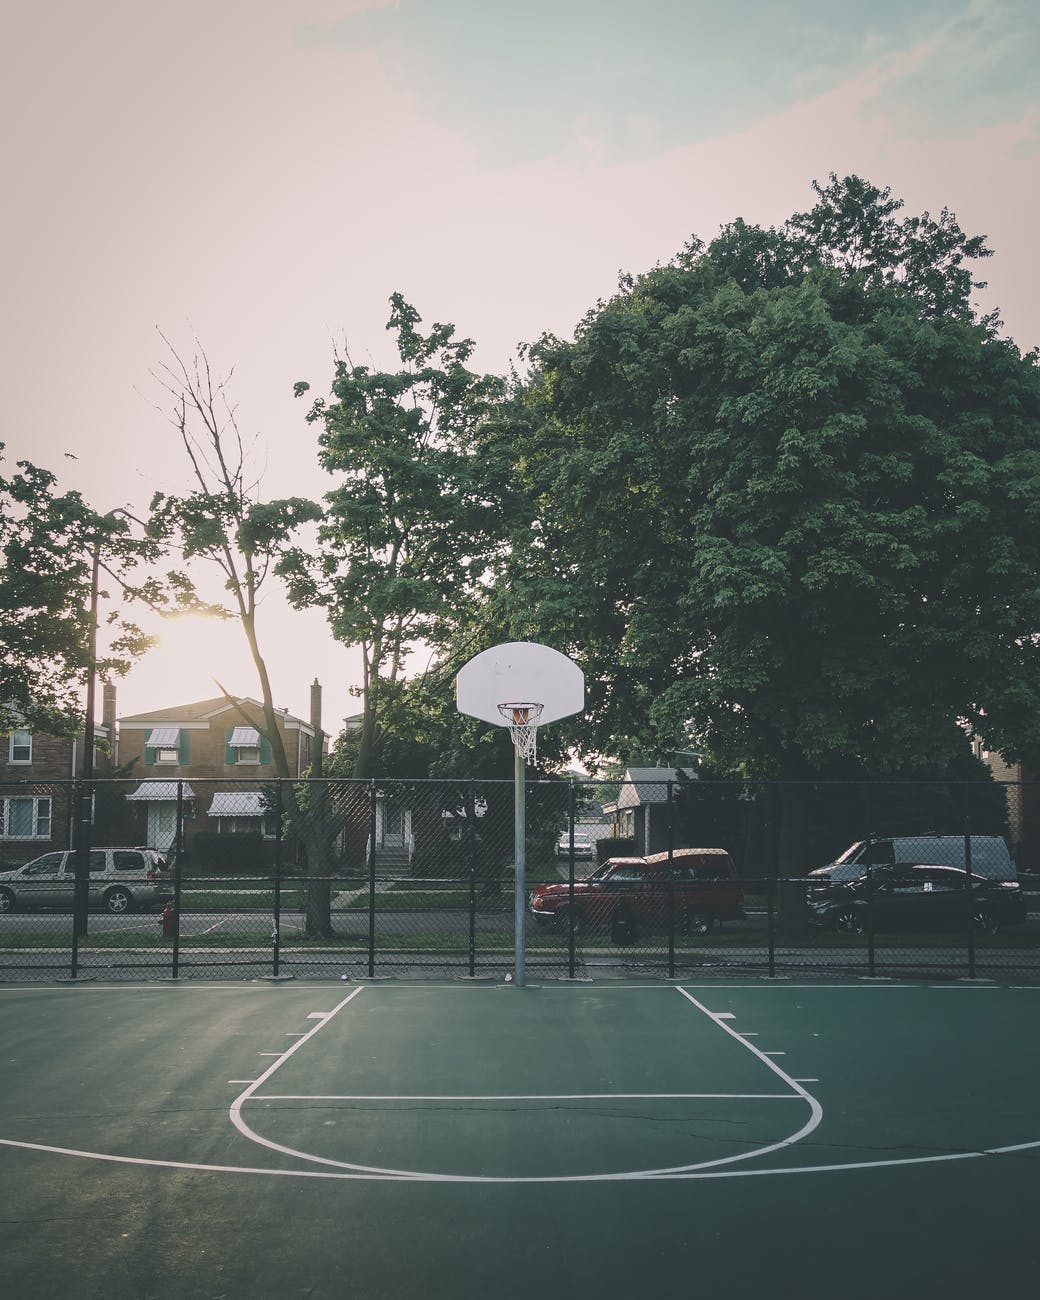 5 Ways to Improve Your Basketball Court